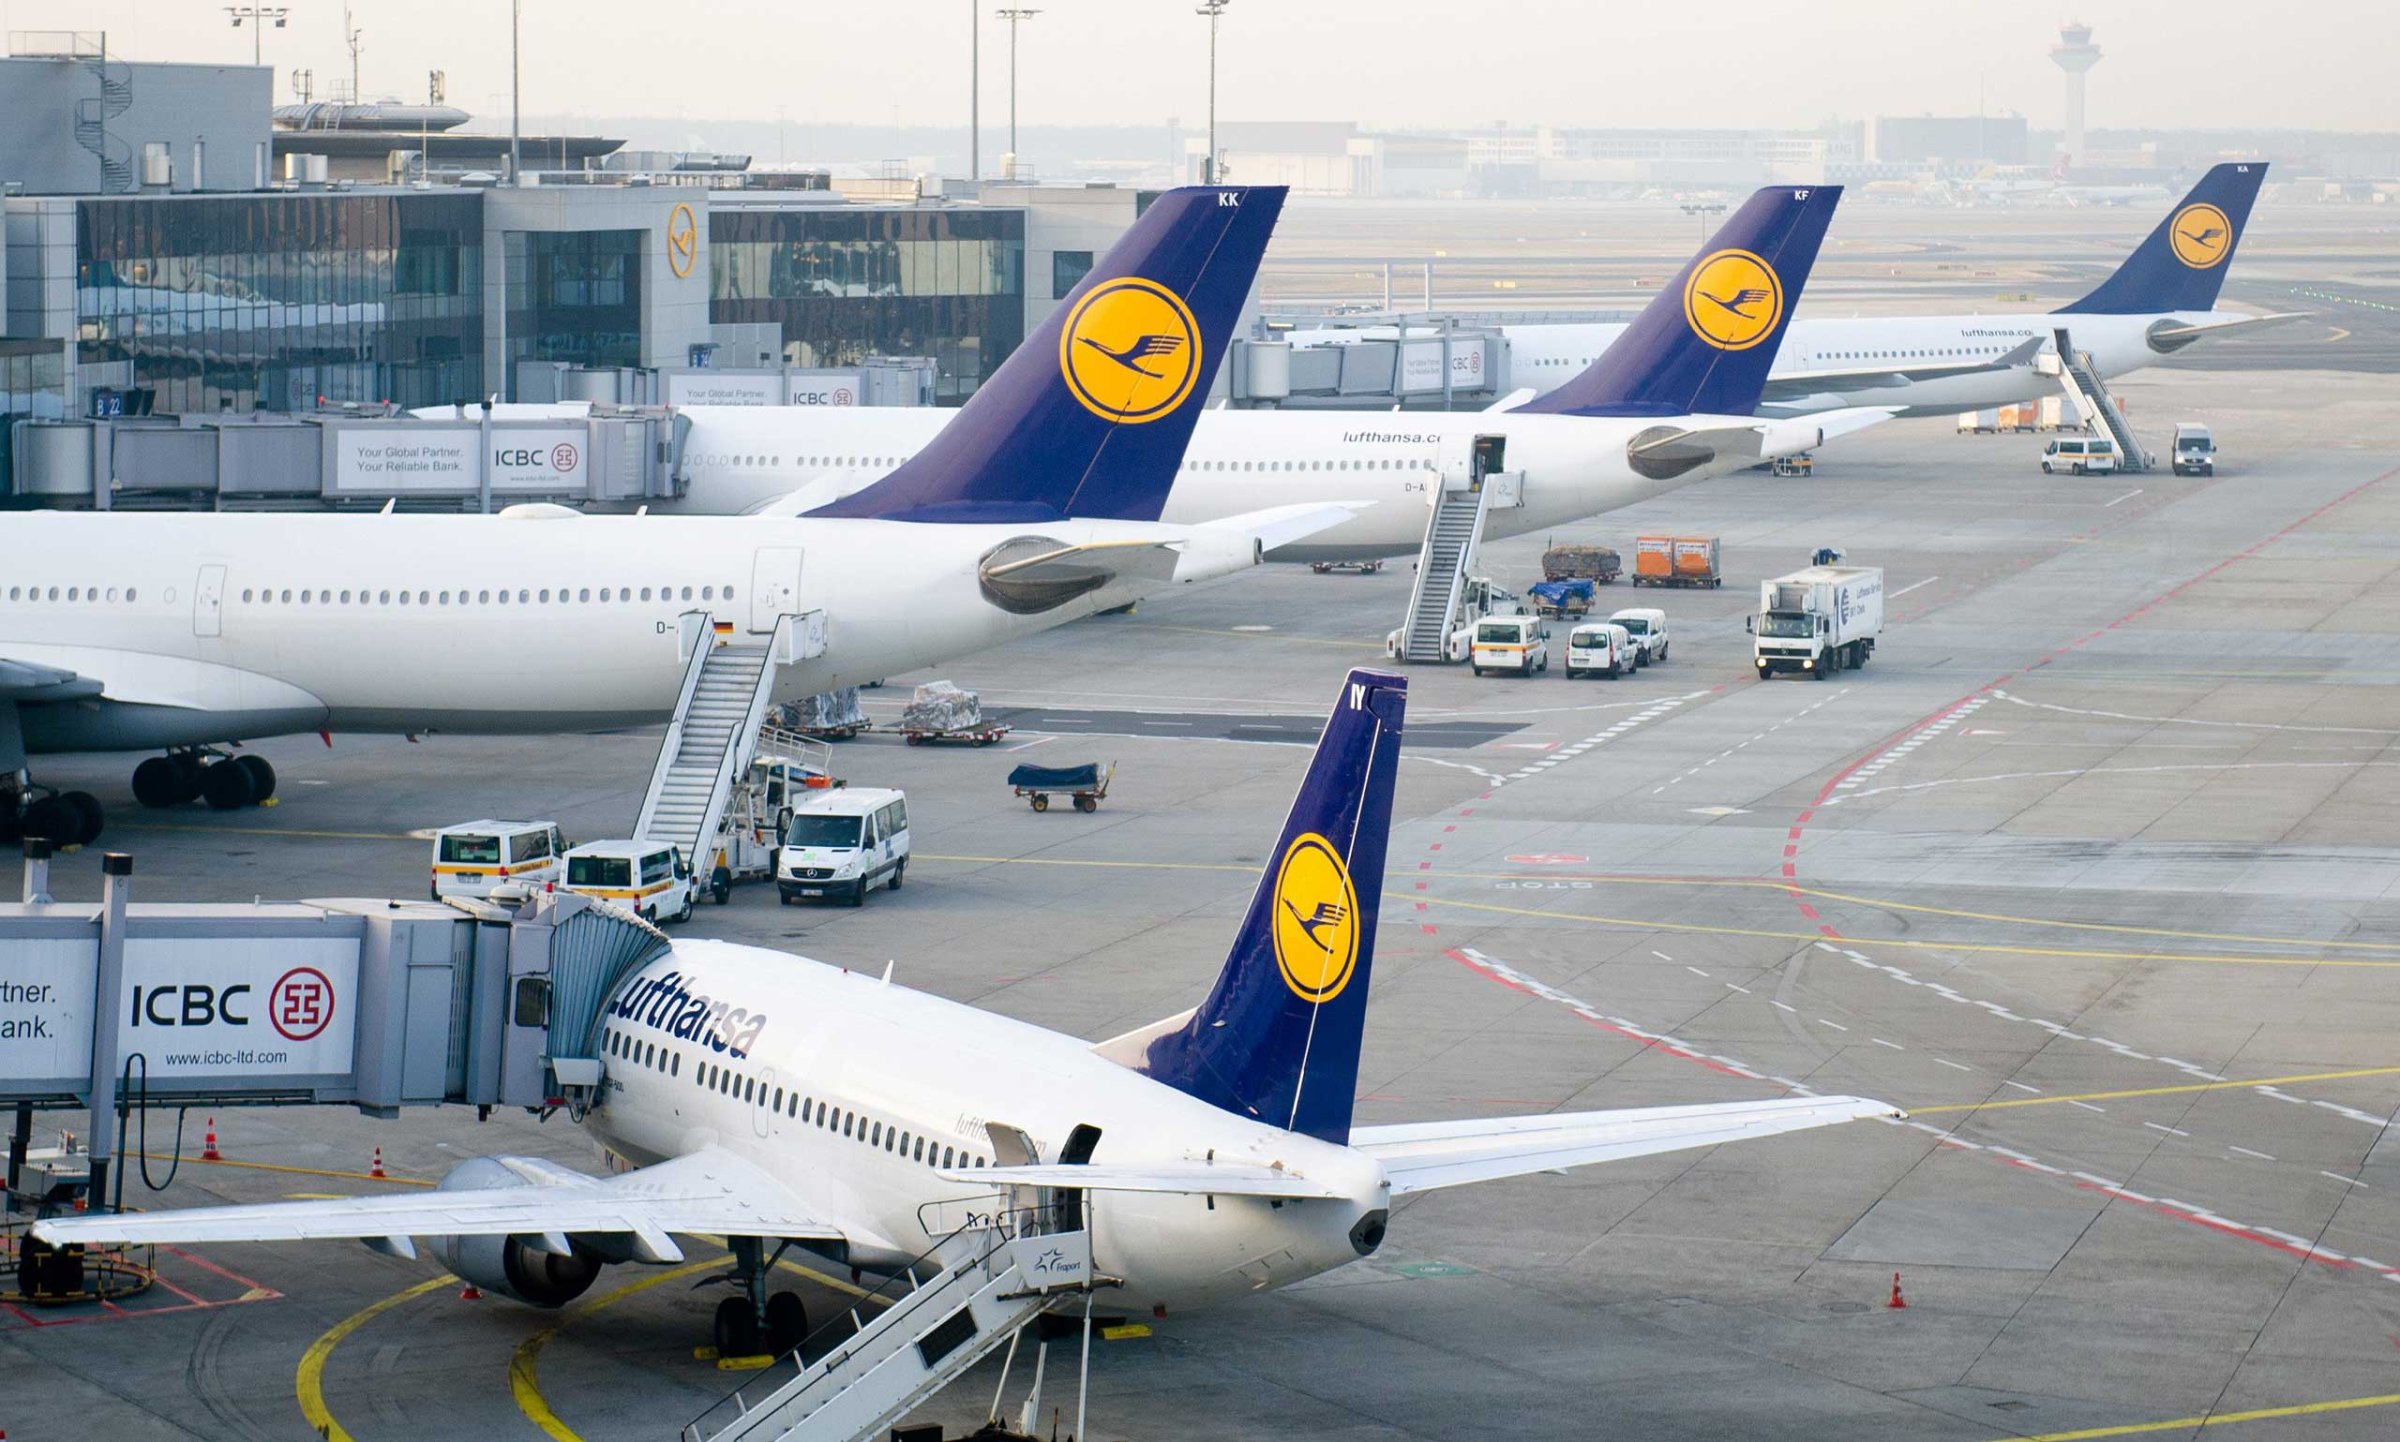 Short-haul and long-haul Lufthansa aircrafts stand at the airport in Frankfurt, Germany on March 18, 2015.